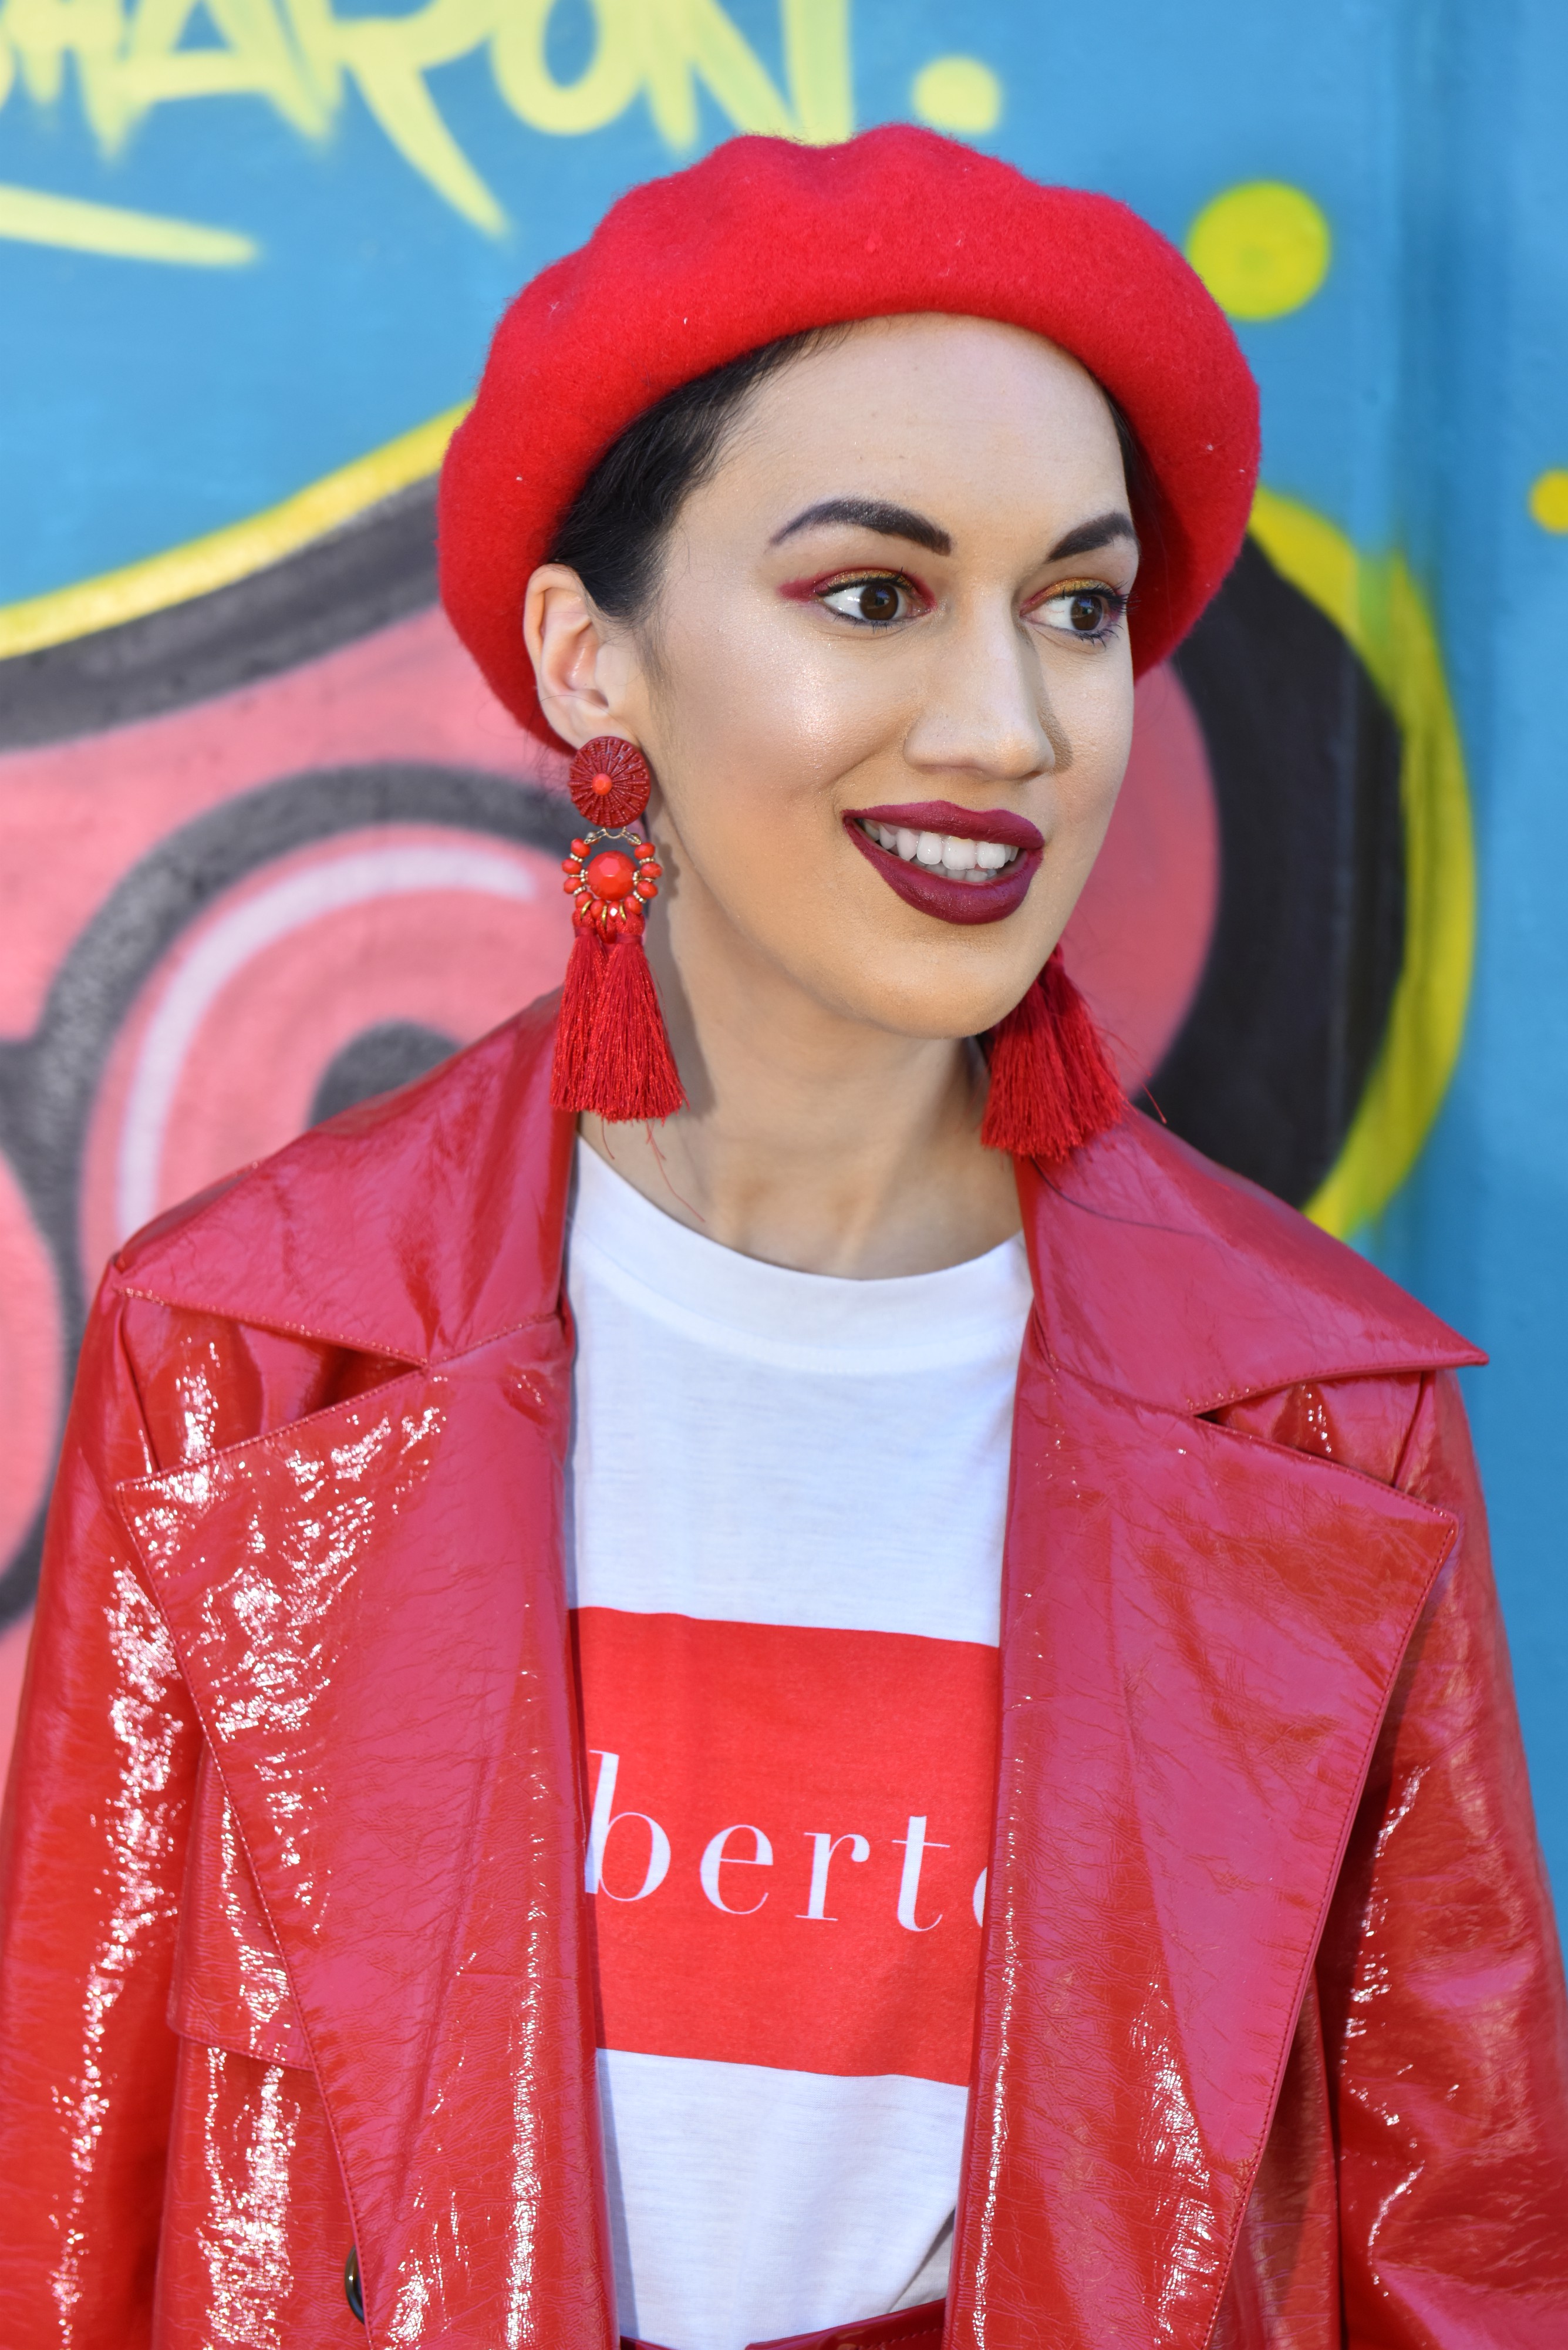 <img src="ana.jpg" alt="ana red beret hat small businesses"/> 